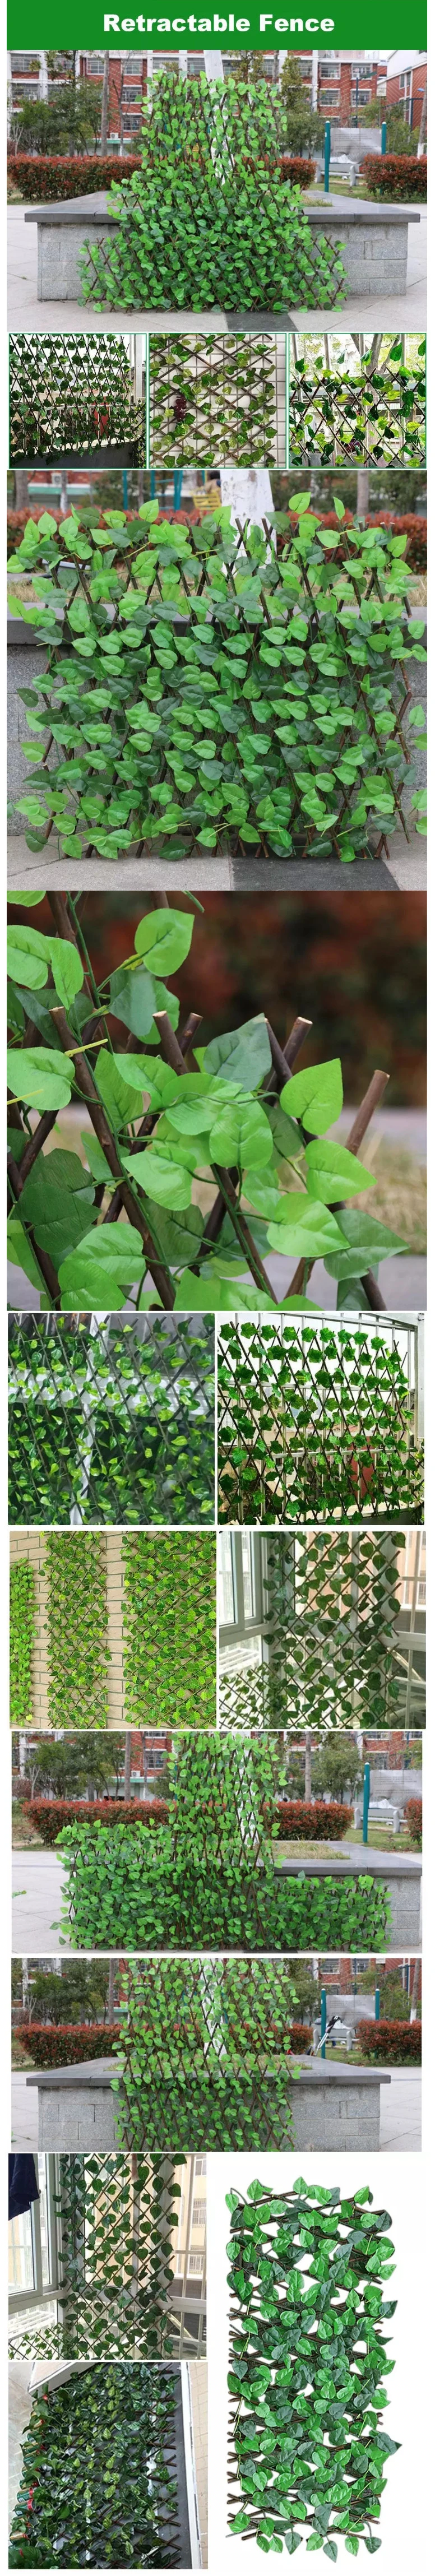 OEM Outdoor Plastic PVC Expandable Privacy Trellis Fence Artificial IVY Willow Gardenia Bougainvillea Flower Leaf Leave